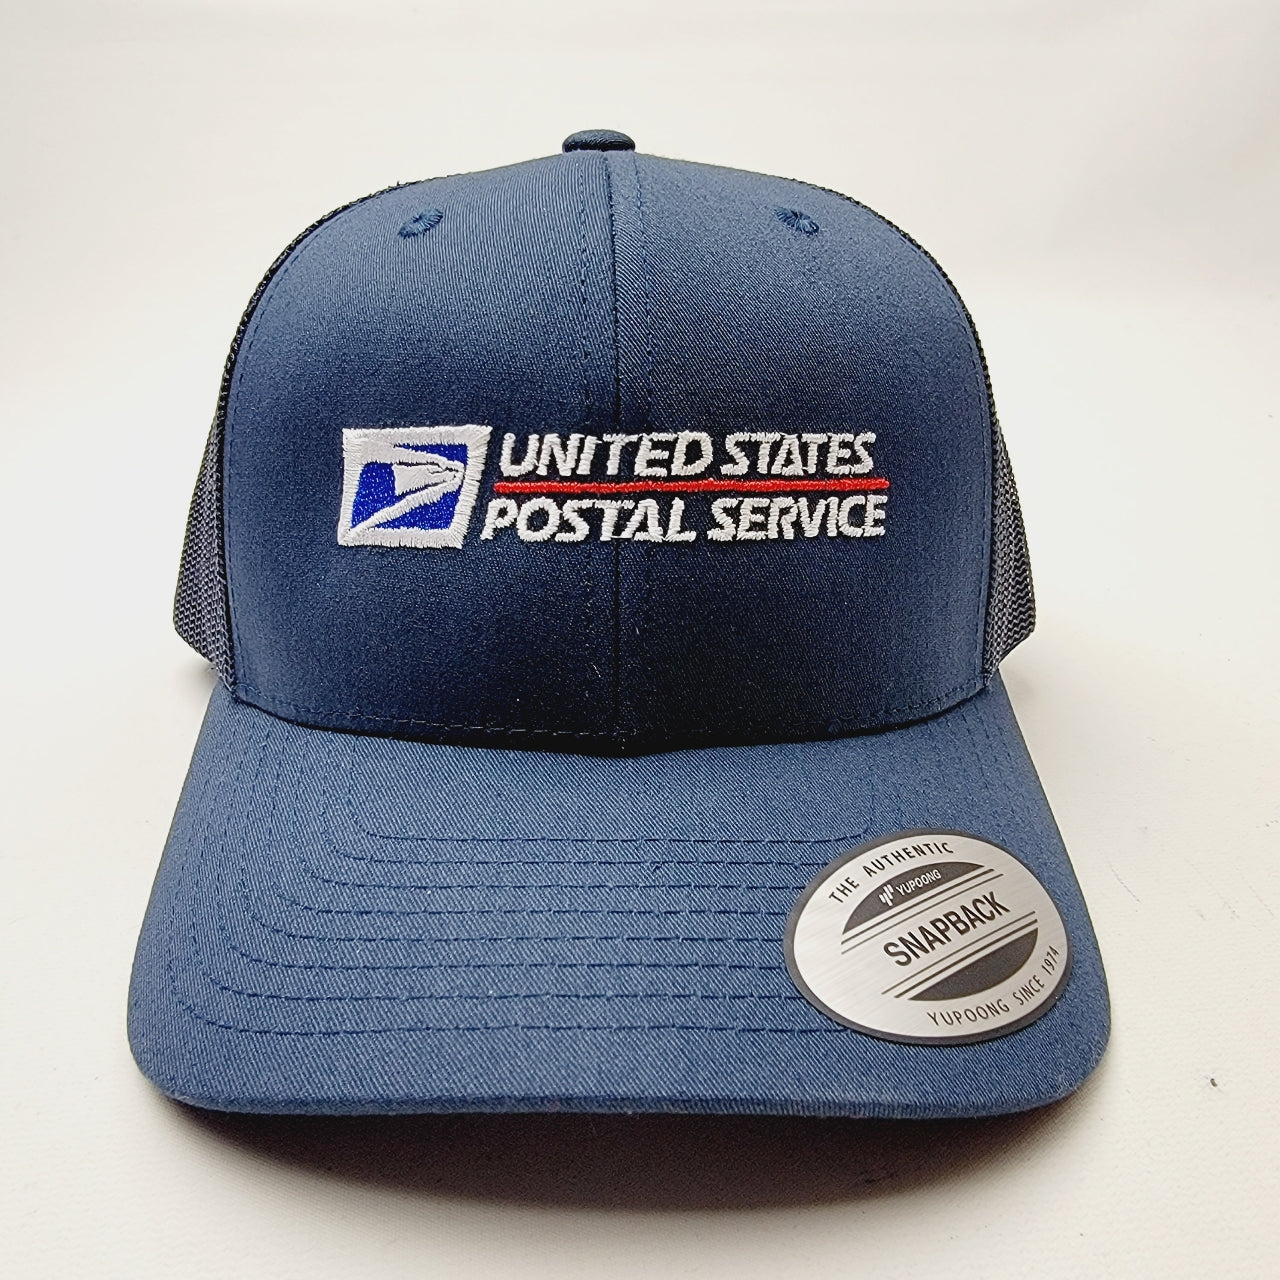 Post Office Postal Embroidered Curved Bill Mesh Snapback Cap Hat Navy Blue